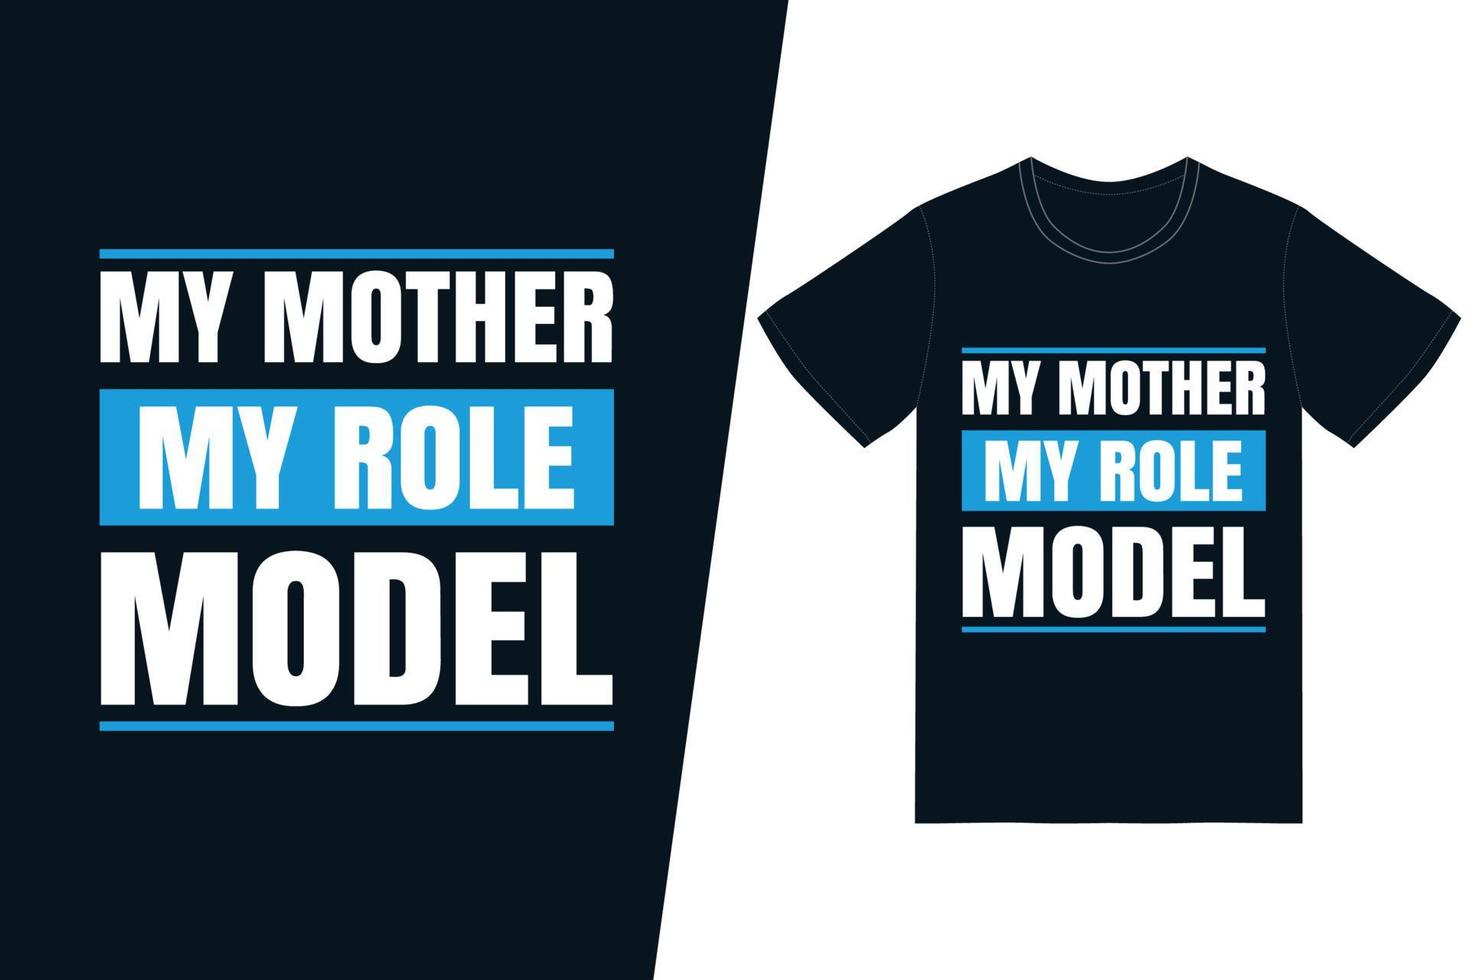 My mother my role model t-shirt design. Happy mothers day t-shirt design vector. For t-shirt print and other uses. vector